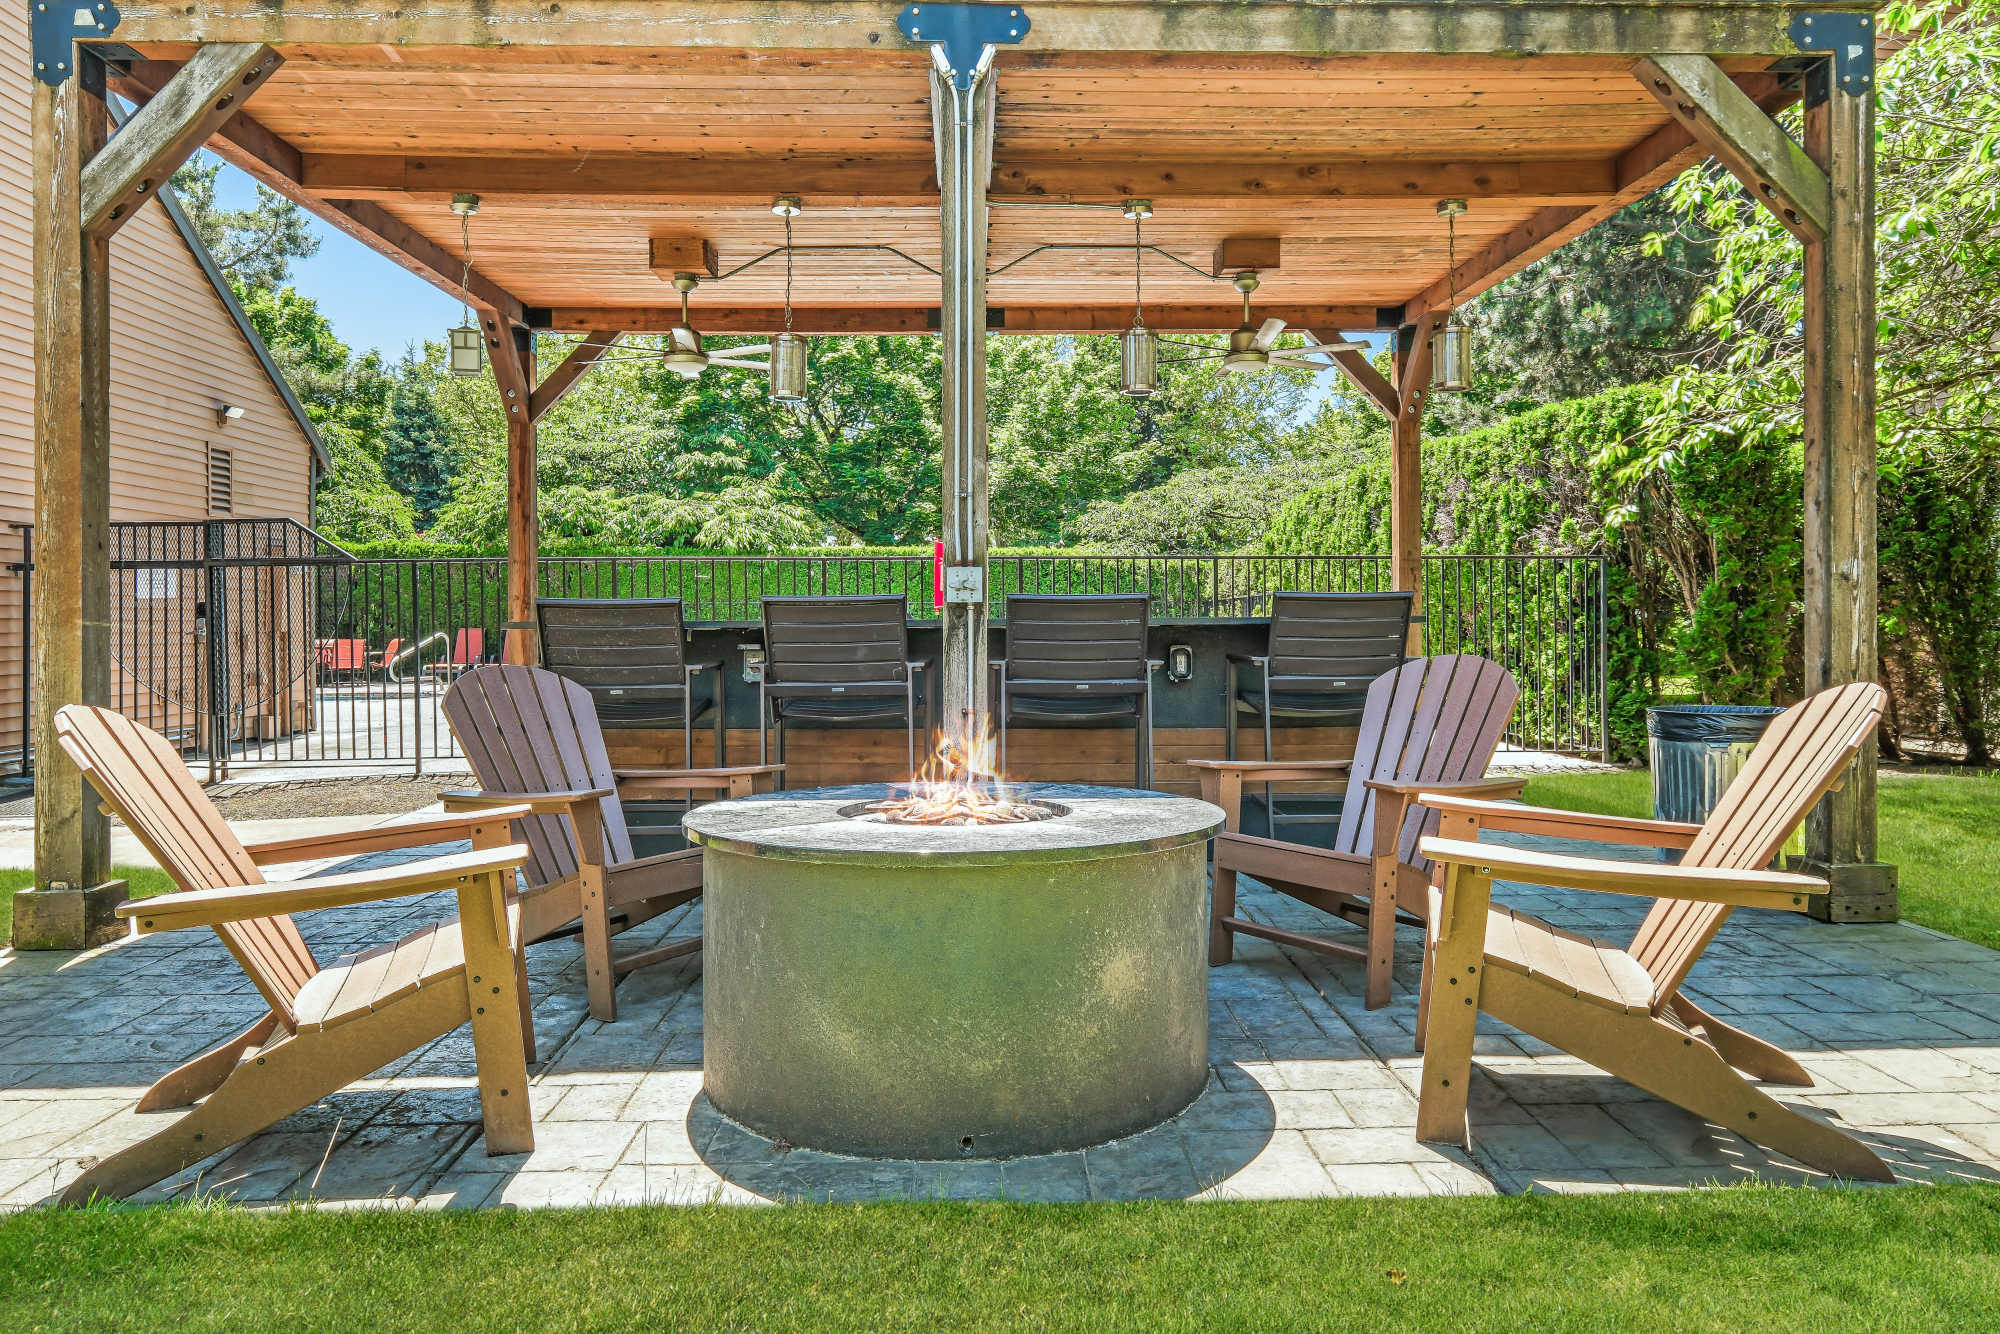 Covered BBQ and fire pit area at Renaissance at 29th Apartments in Vancouver, Washington